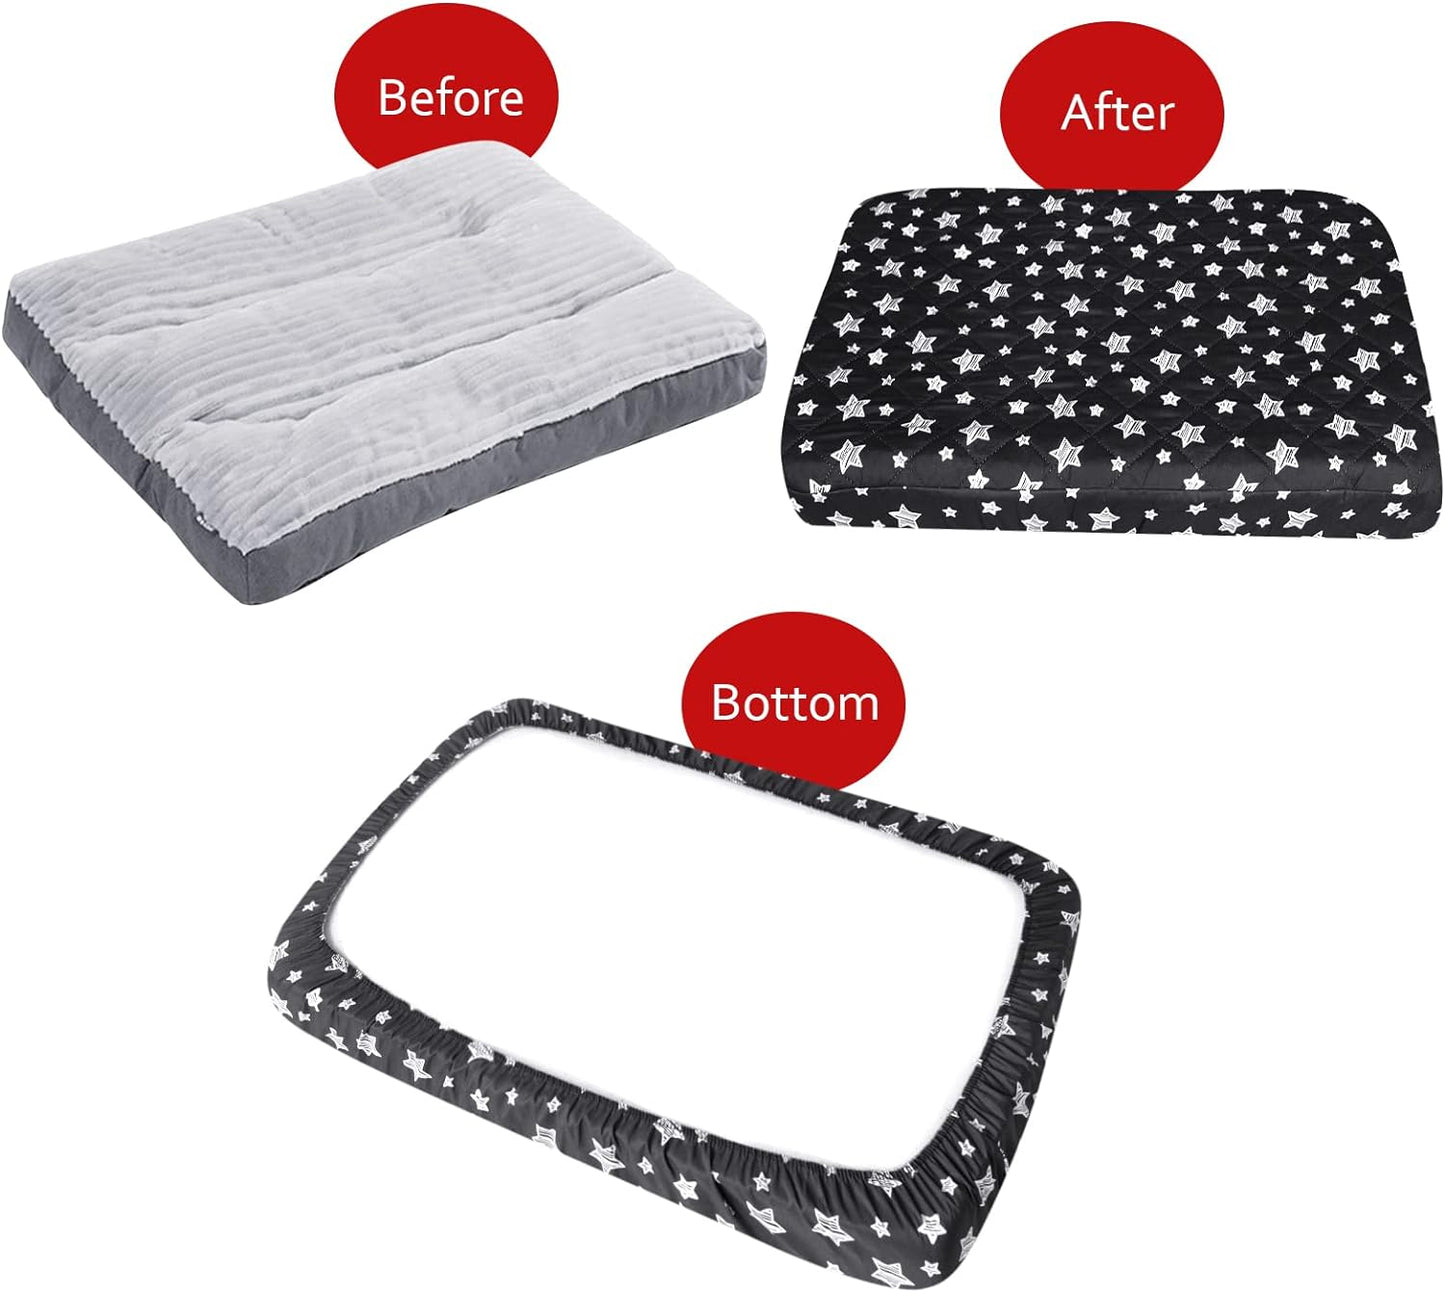 Dog Bed Covers, Waterproof Dog Bed Covers Dog Pillow Cover Quilted, for Dog/Cat, Black Star